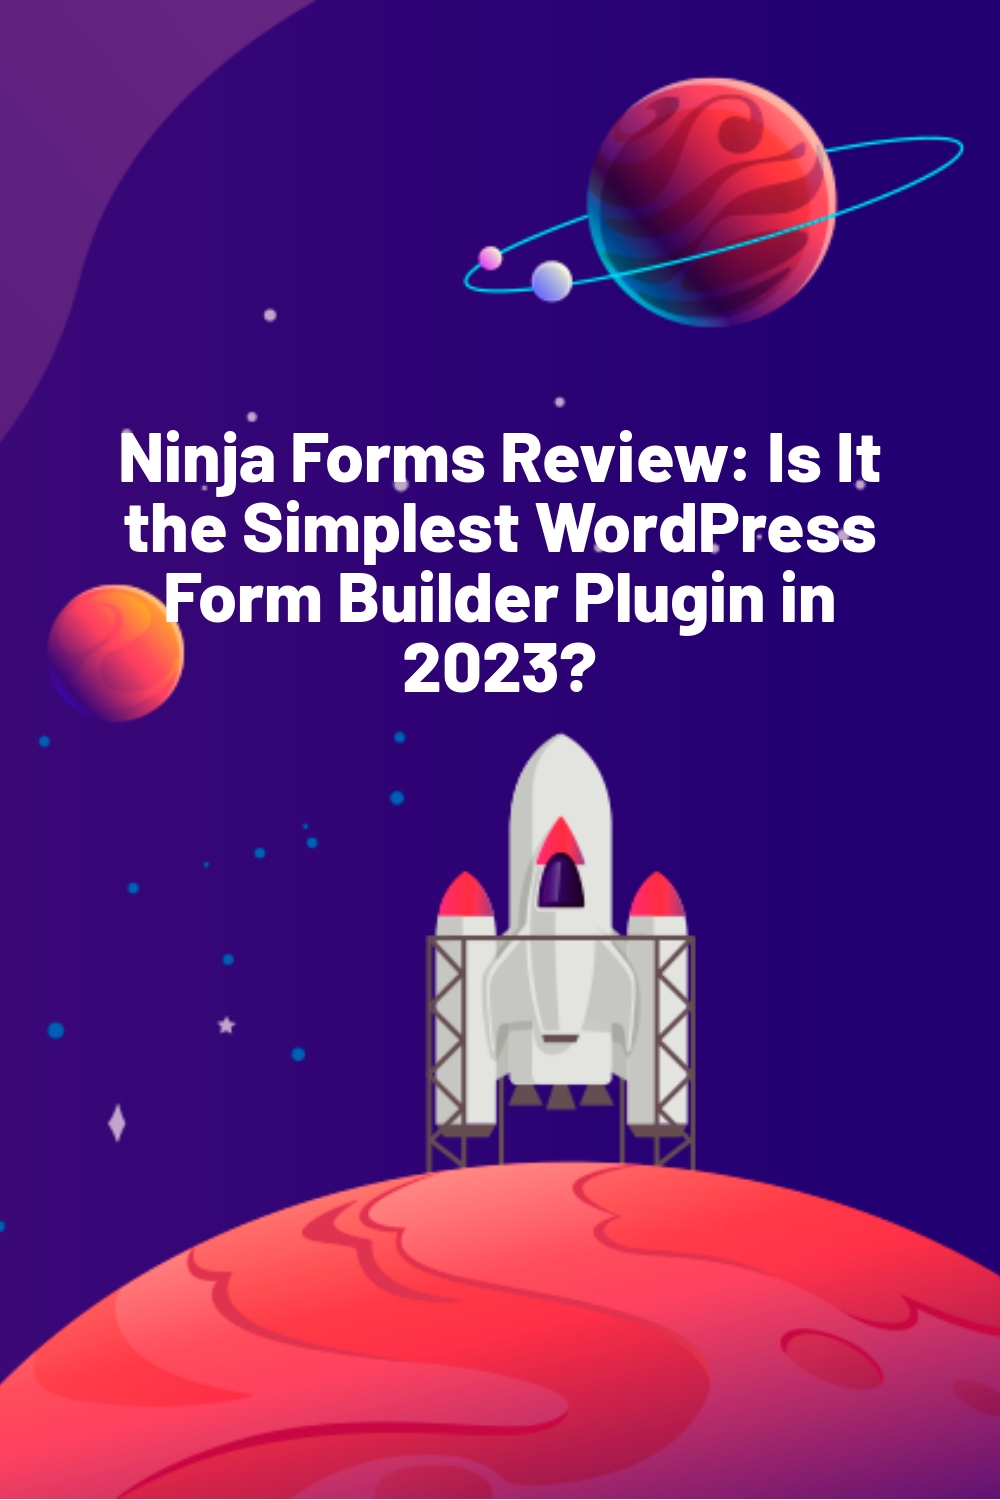 Ninja Forms Review: Is It the Simplest WordPress Form Builder Plugin in 2023?